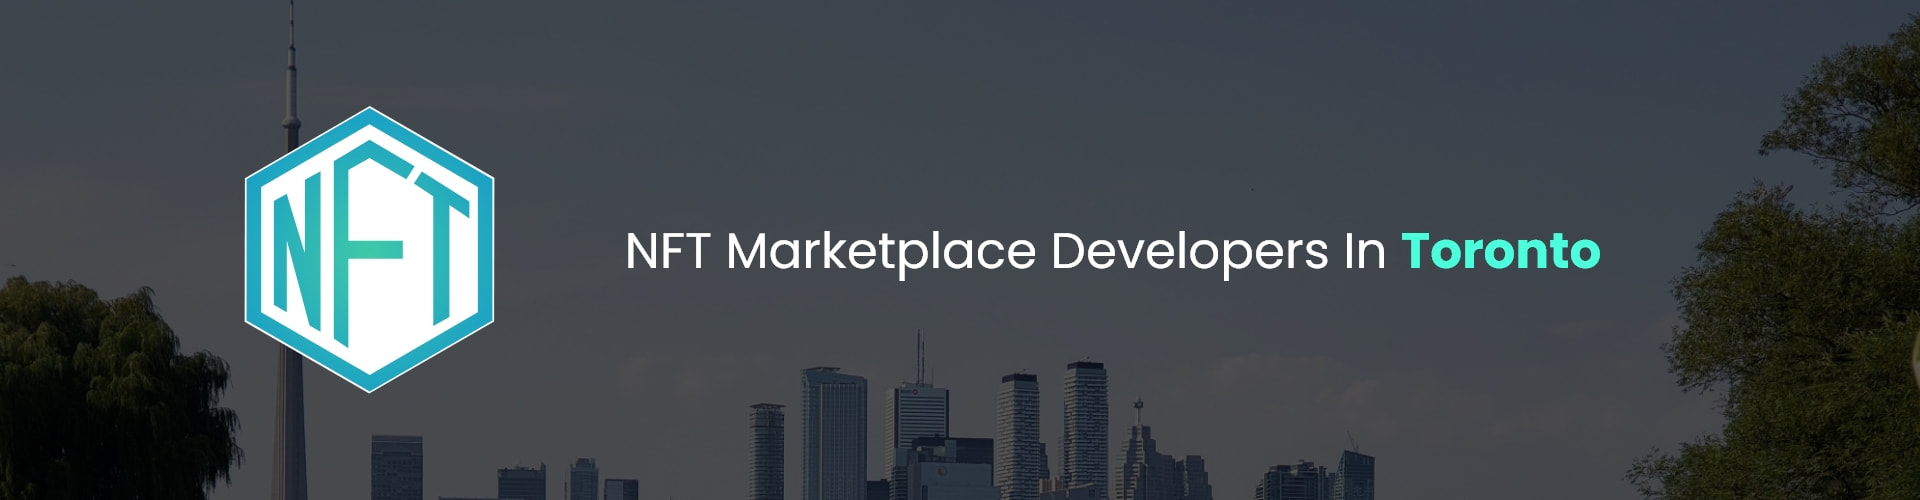 hire nft marketplace developers in toronto